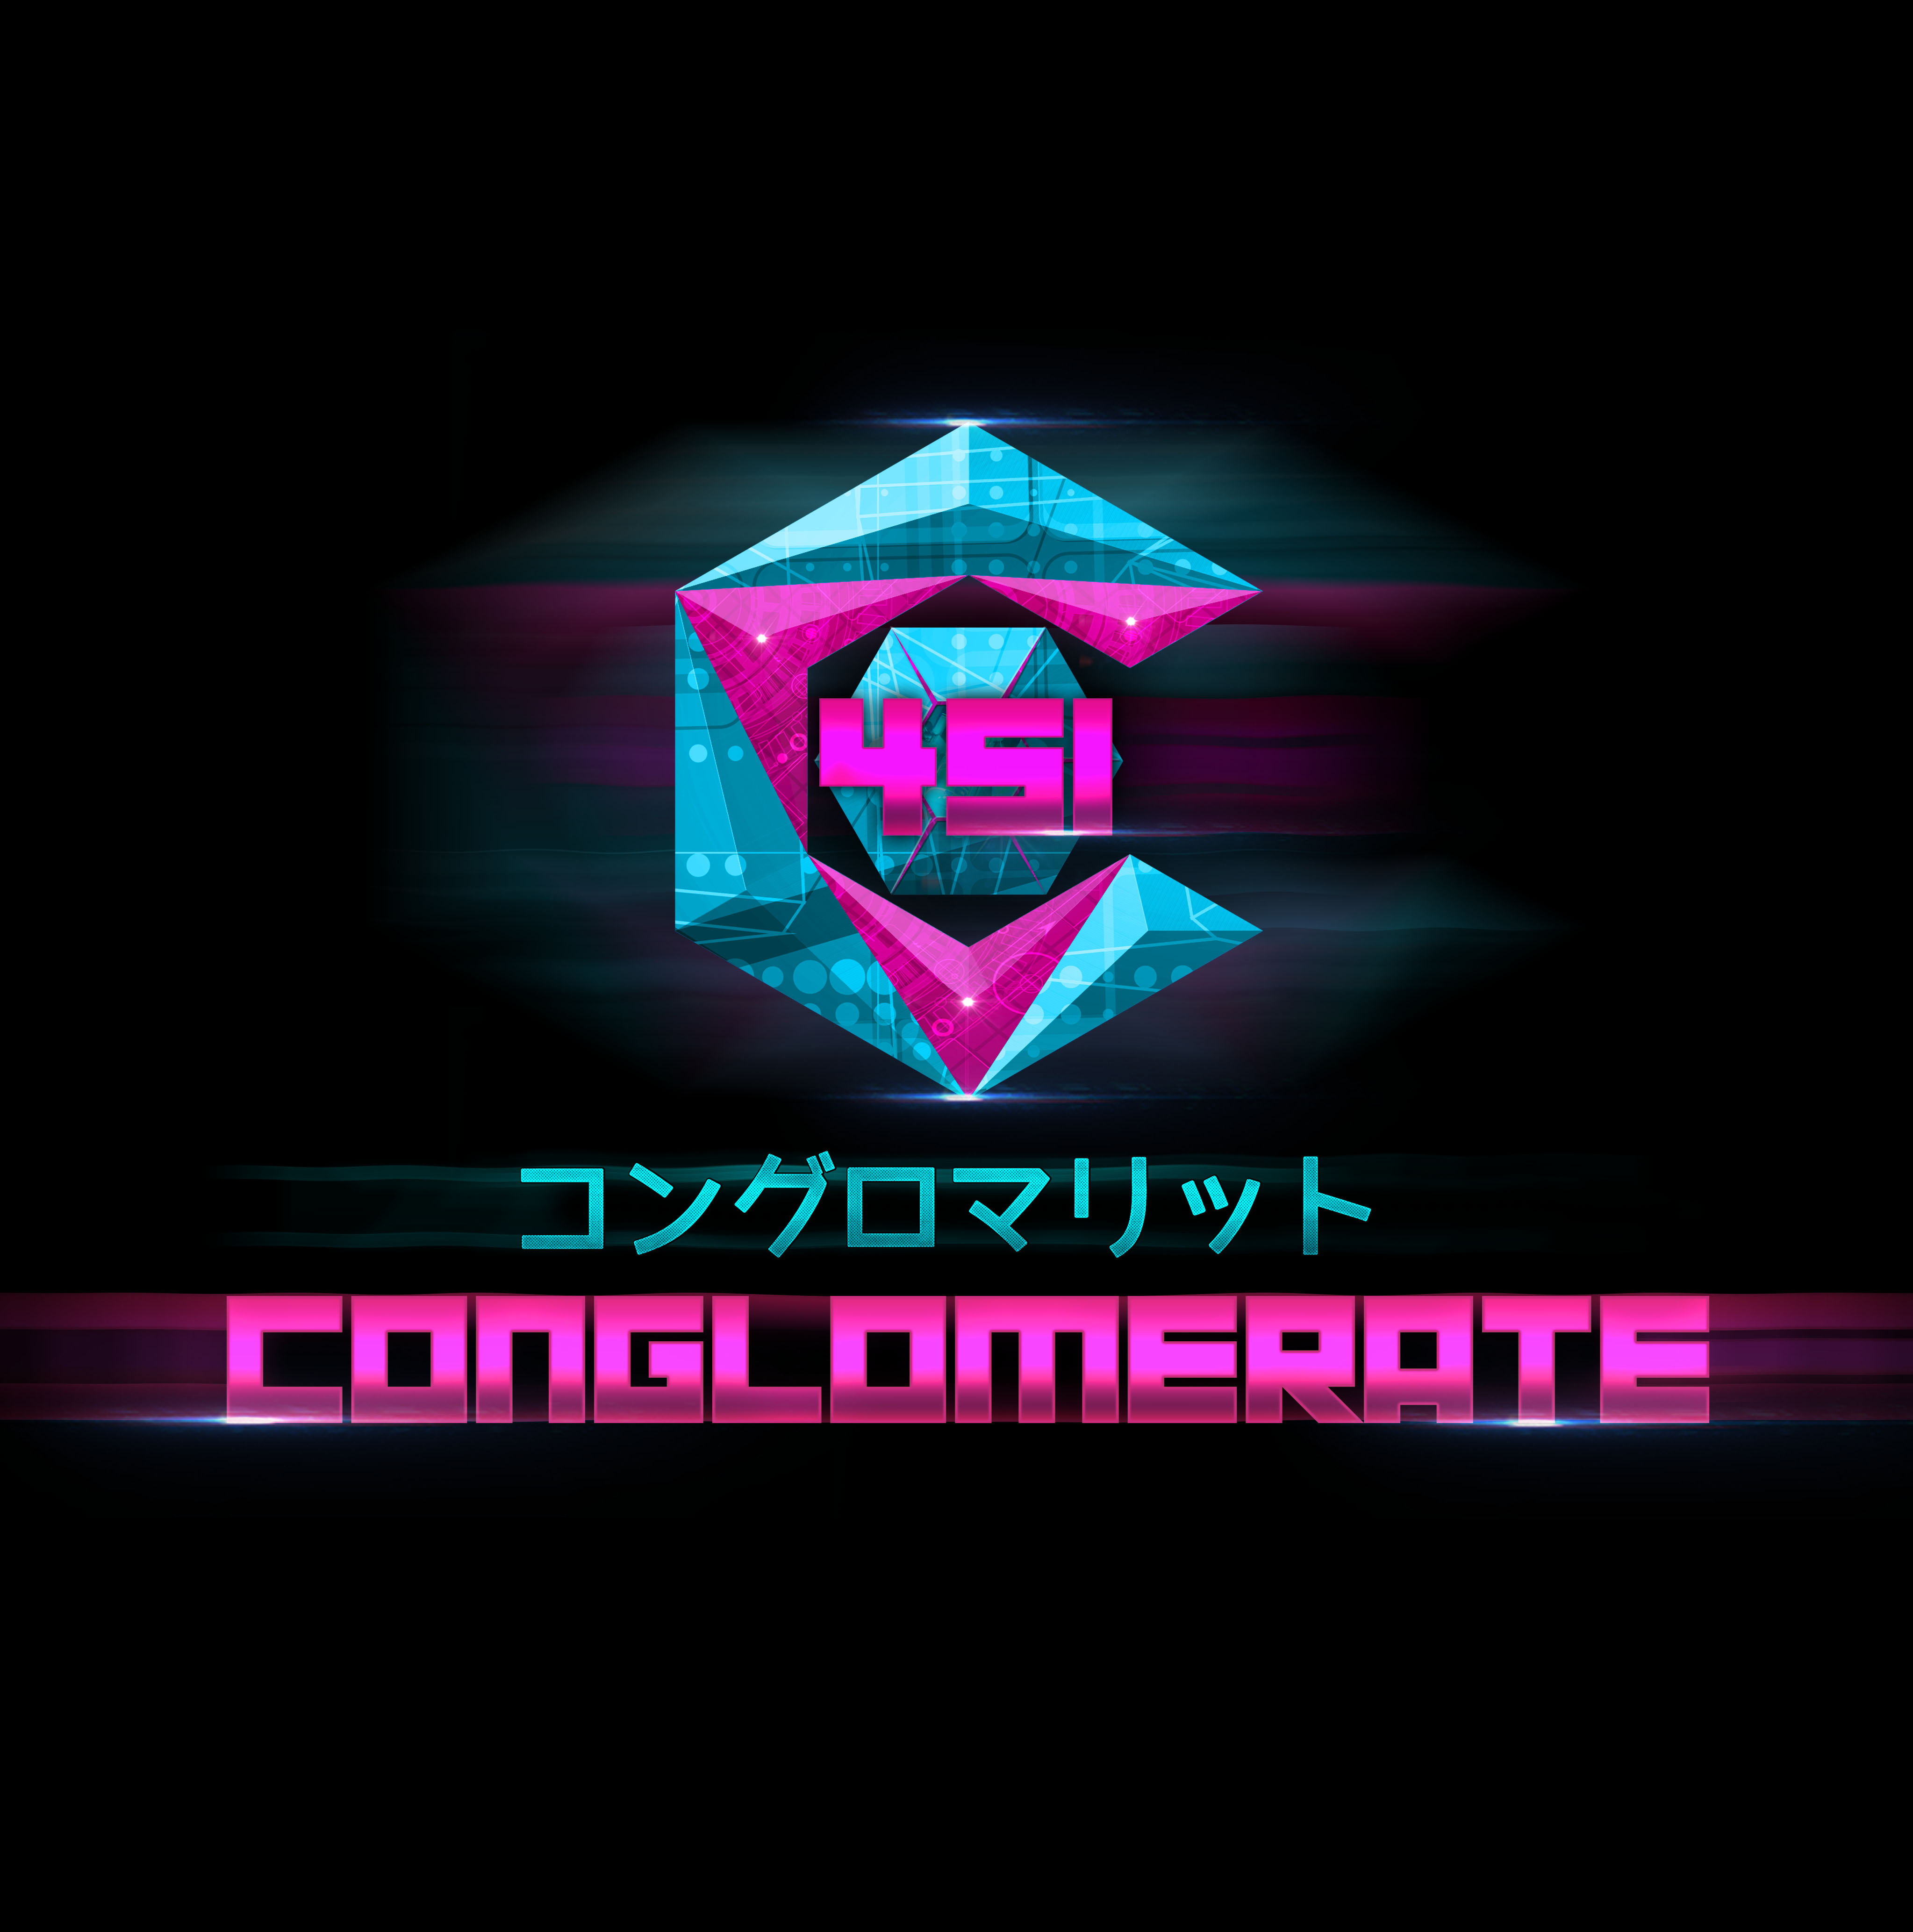 download the new for windows Conglomerate 451